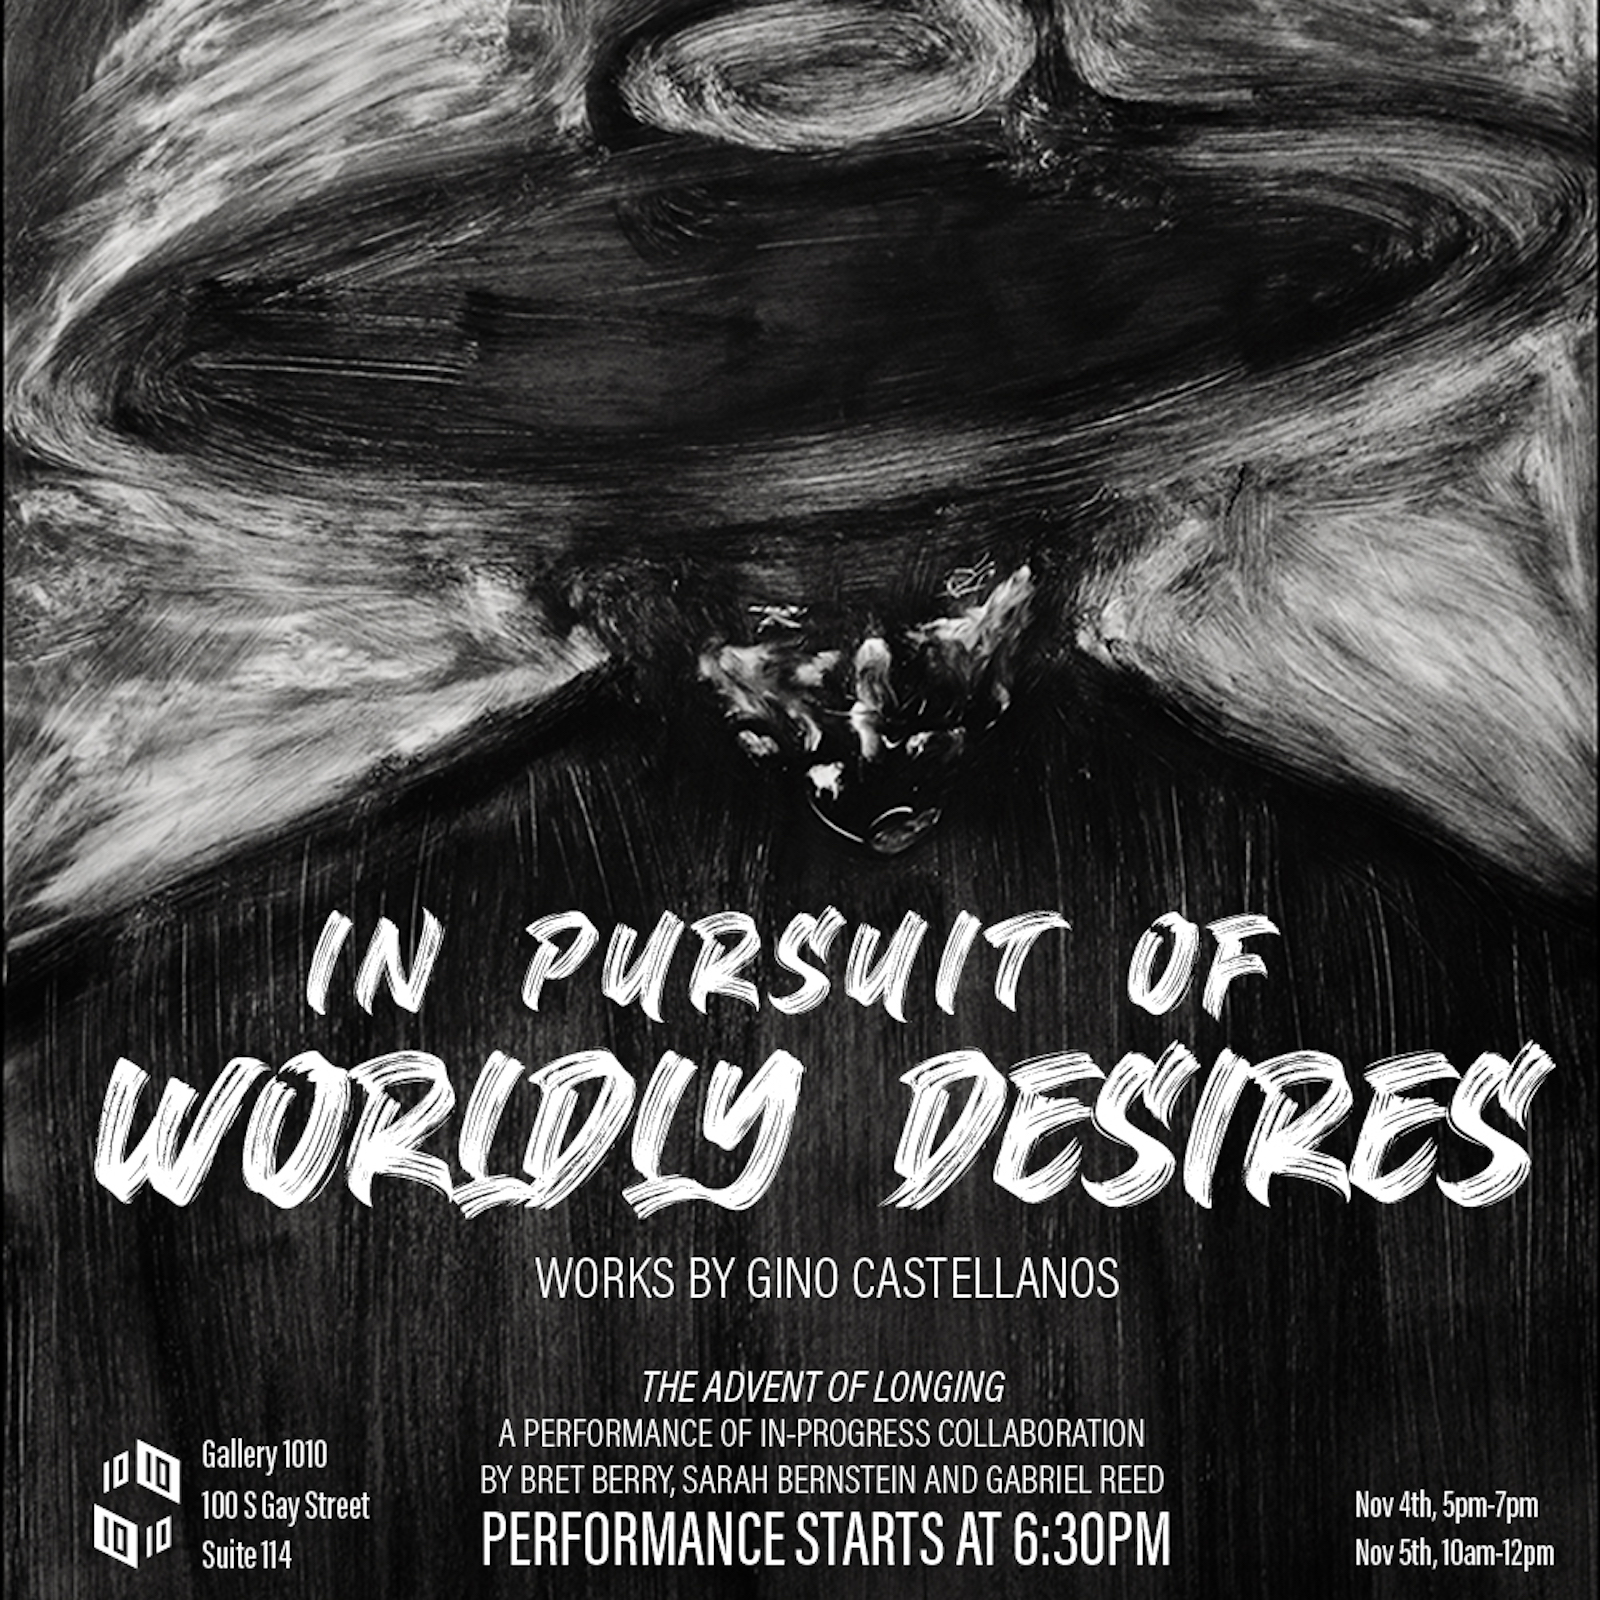 A black and white advertisement of In Pursuit of Worldly Desires, works by Gino Castellanos